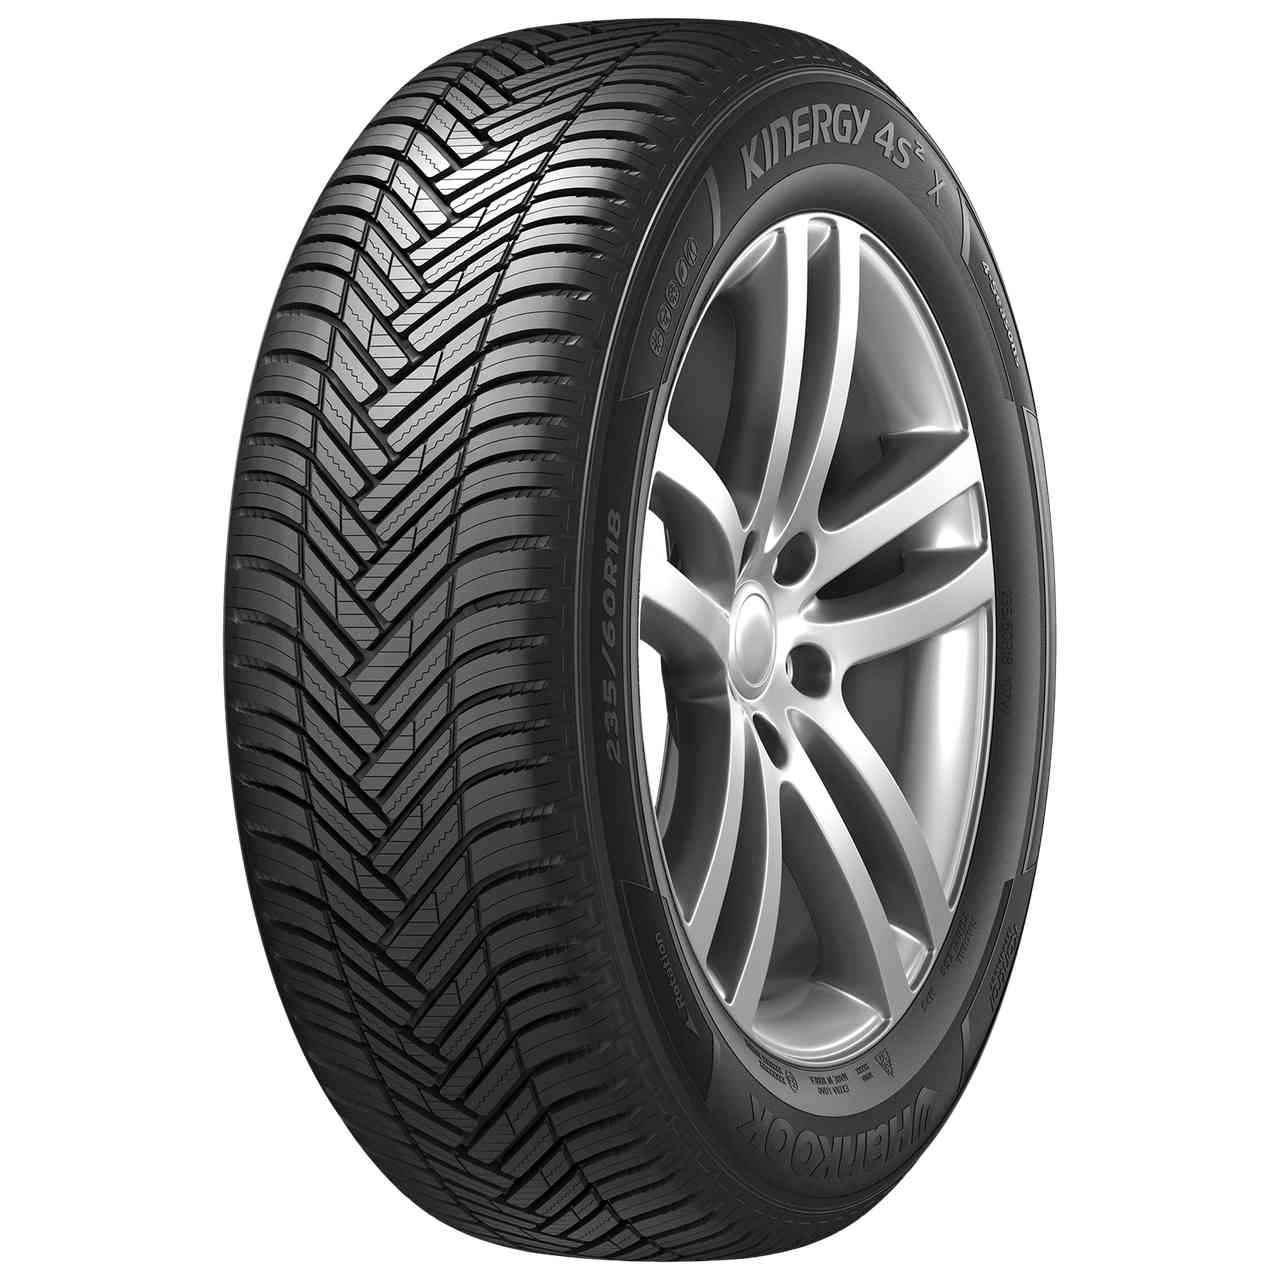 HANKOOK KINERGY 4S 2 X (H750A) 235/55R18 104V BSW